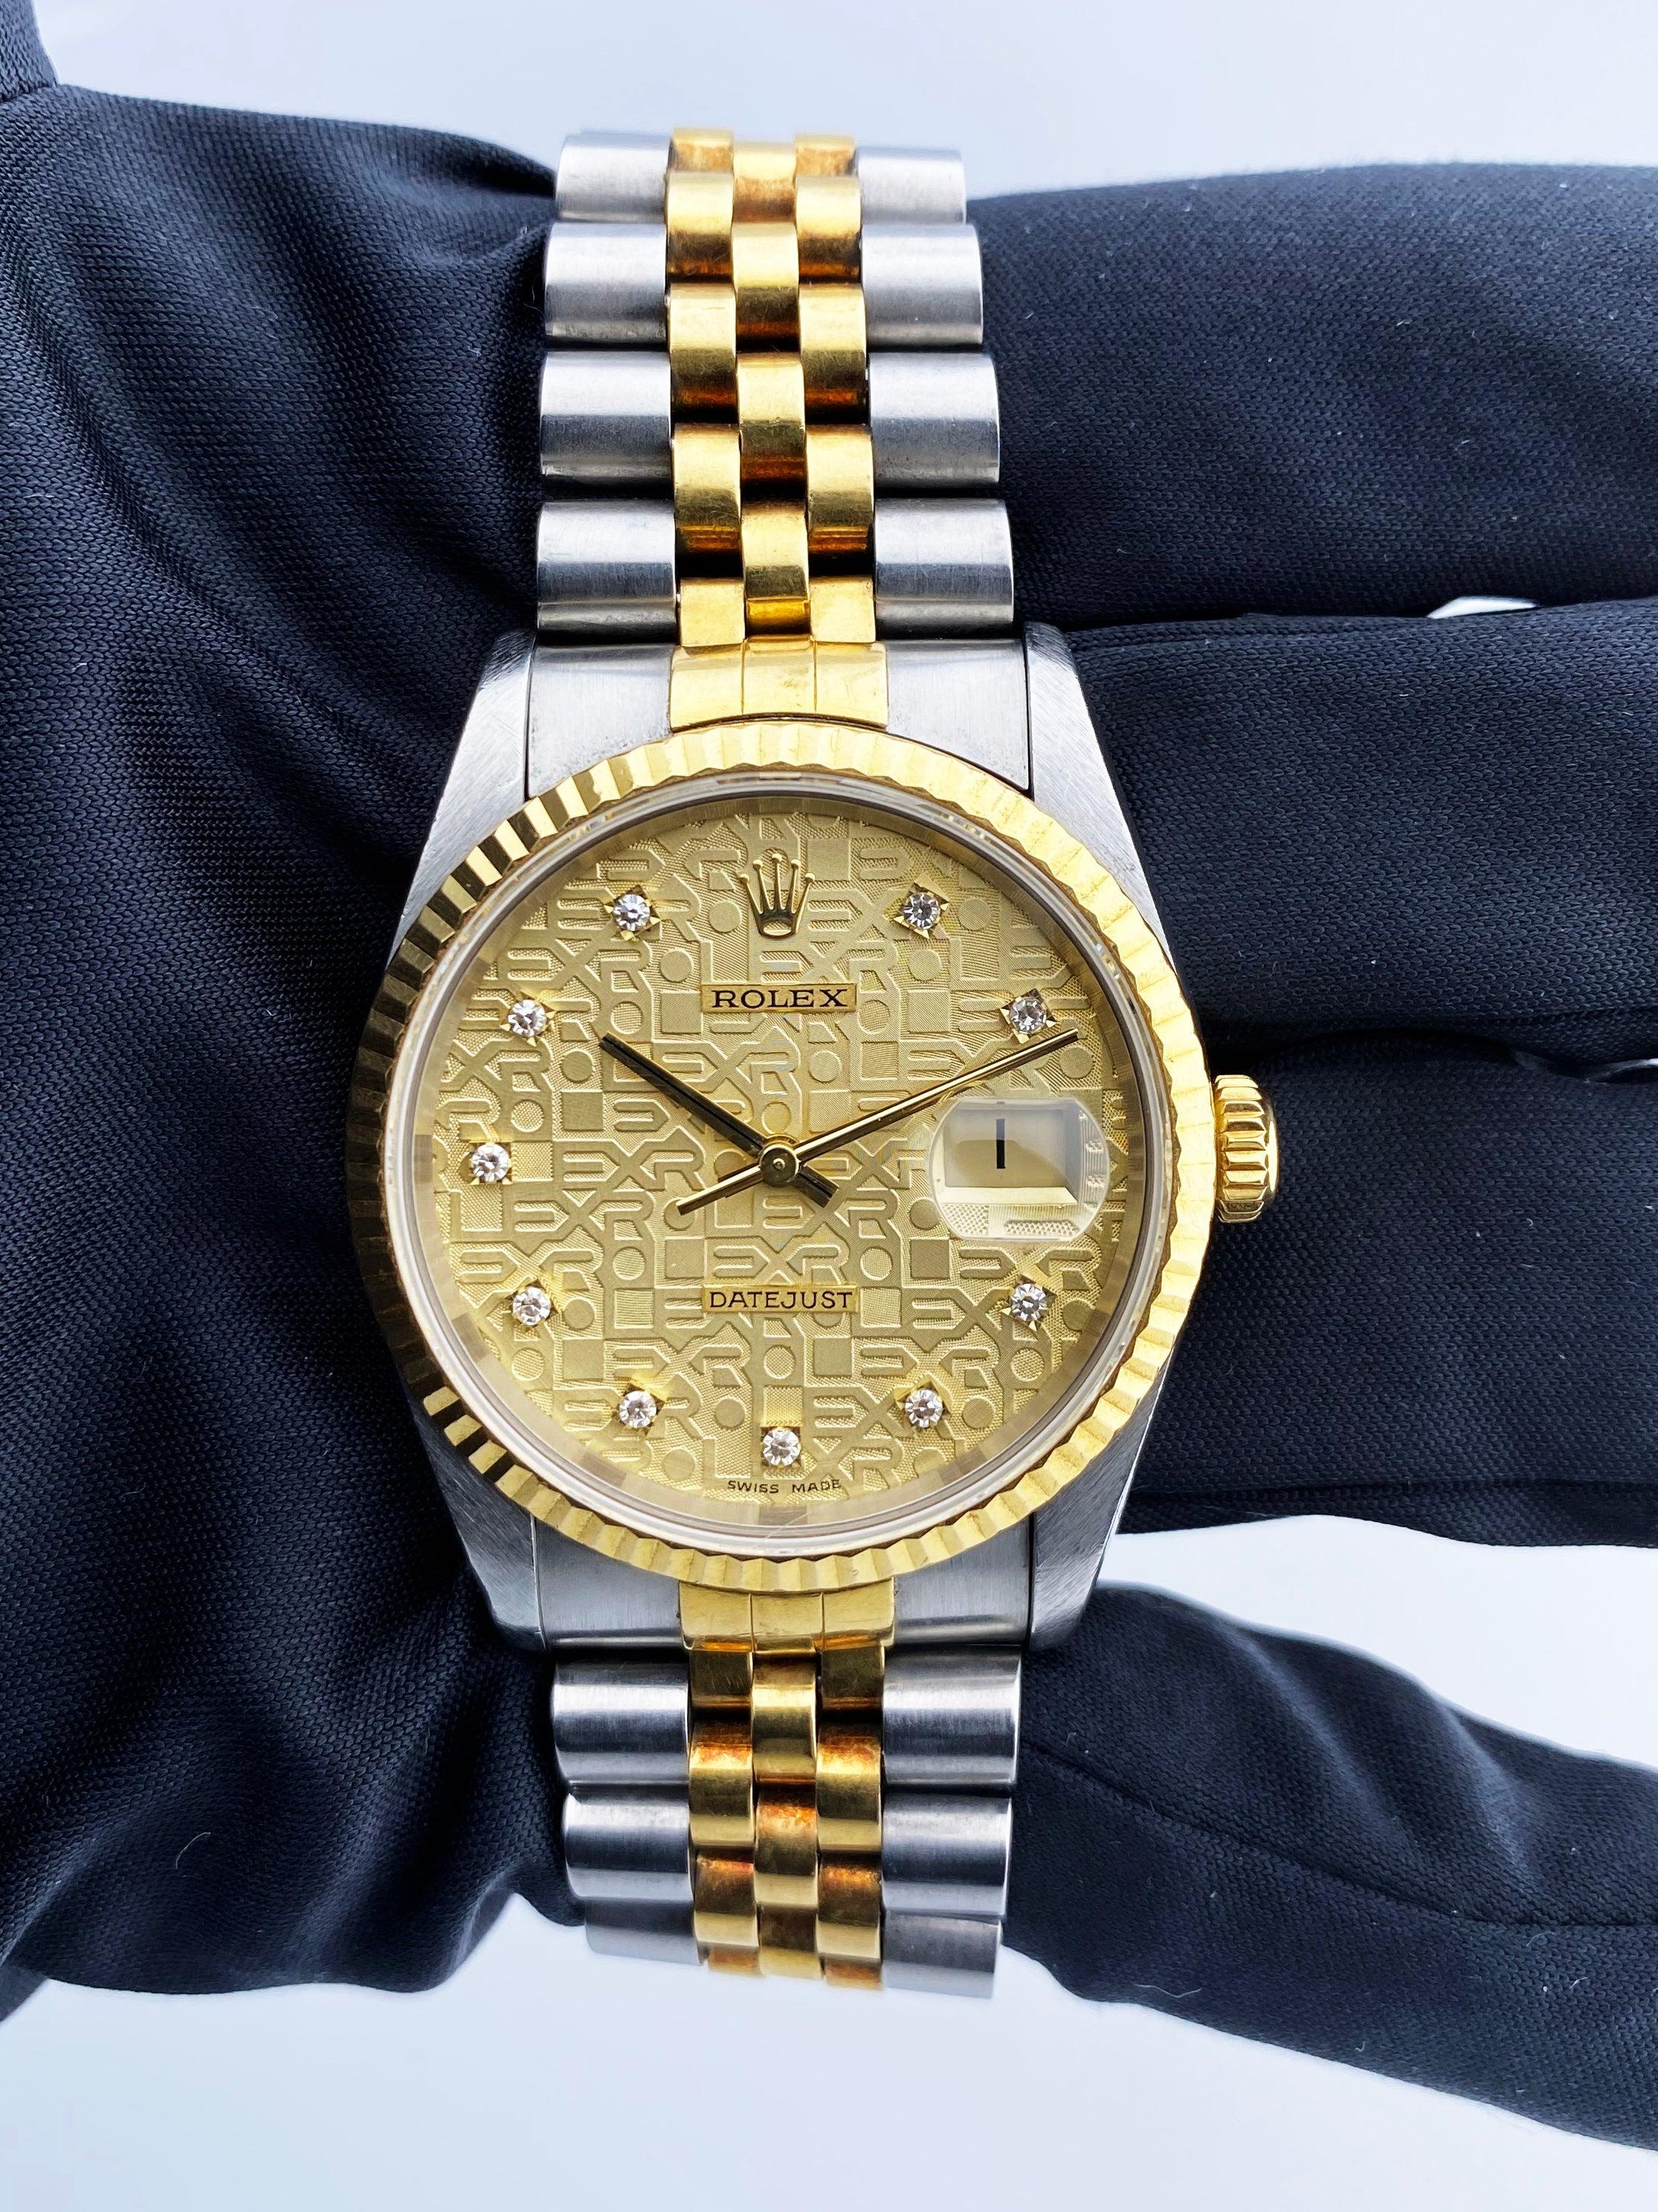 Rolex Datejust 16233 Mens Watch. 36mm stainless steel case. 18K yellow gold fluted bezel. Champagne Anniversary dial with gold hands and original factory diamond set hour markers. Date display at the 3 o'clock position. Stainless steel & 18k yellow